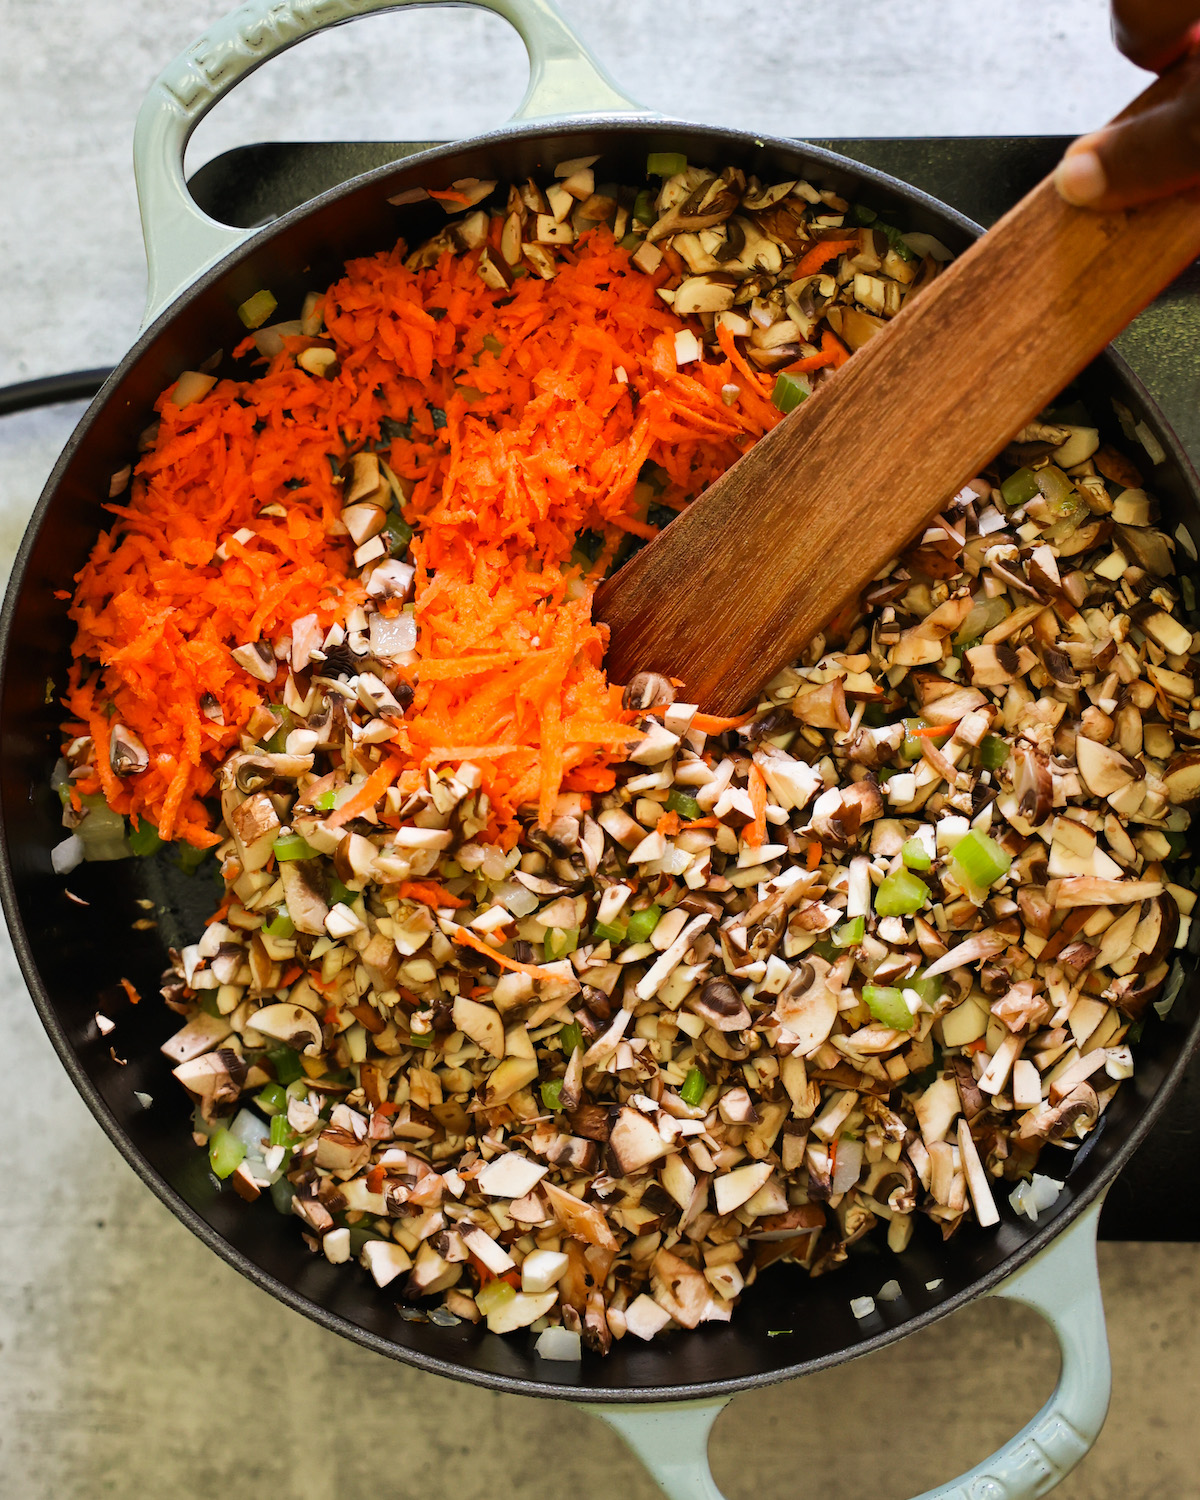 carrots and mushrooms sautéing in a skillet